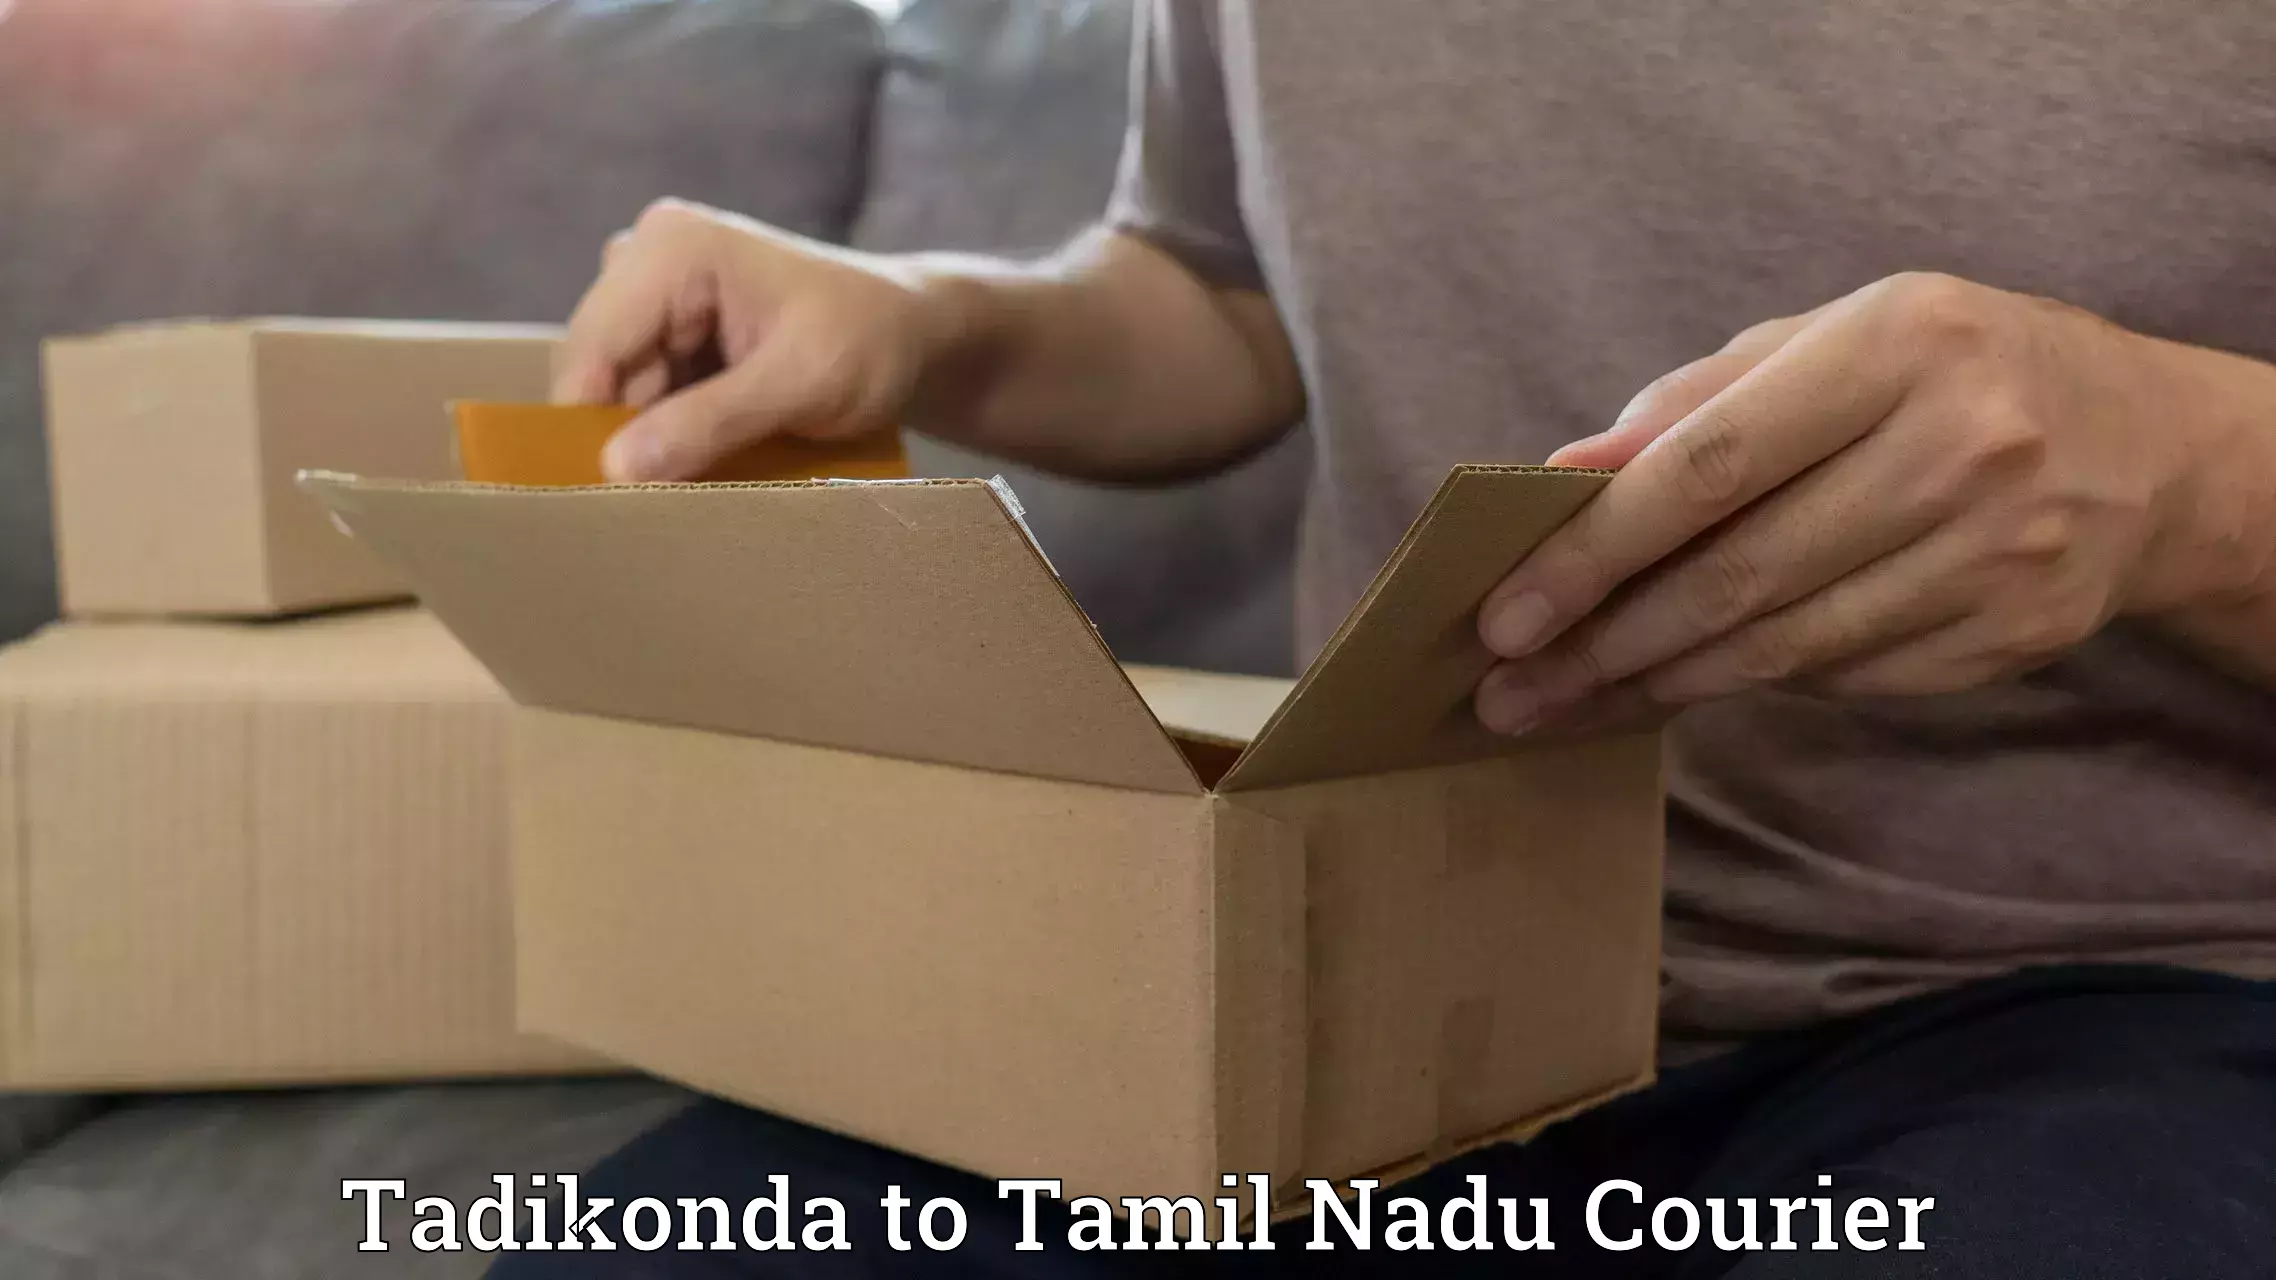 Reliable delivery network Tadikonda to Thanjavur